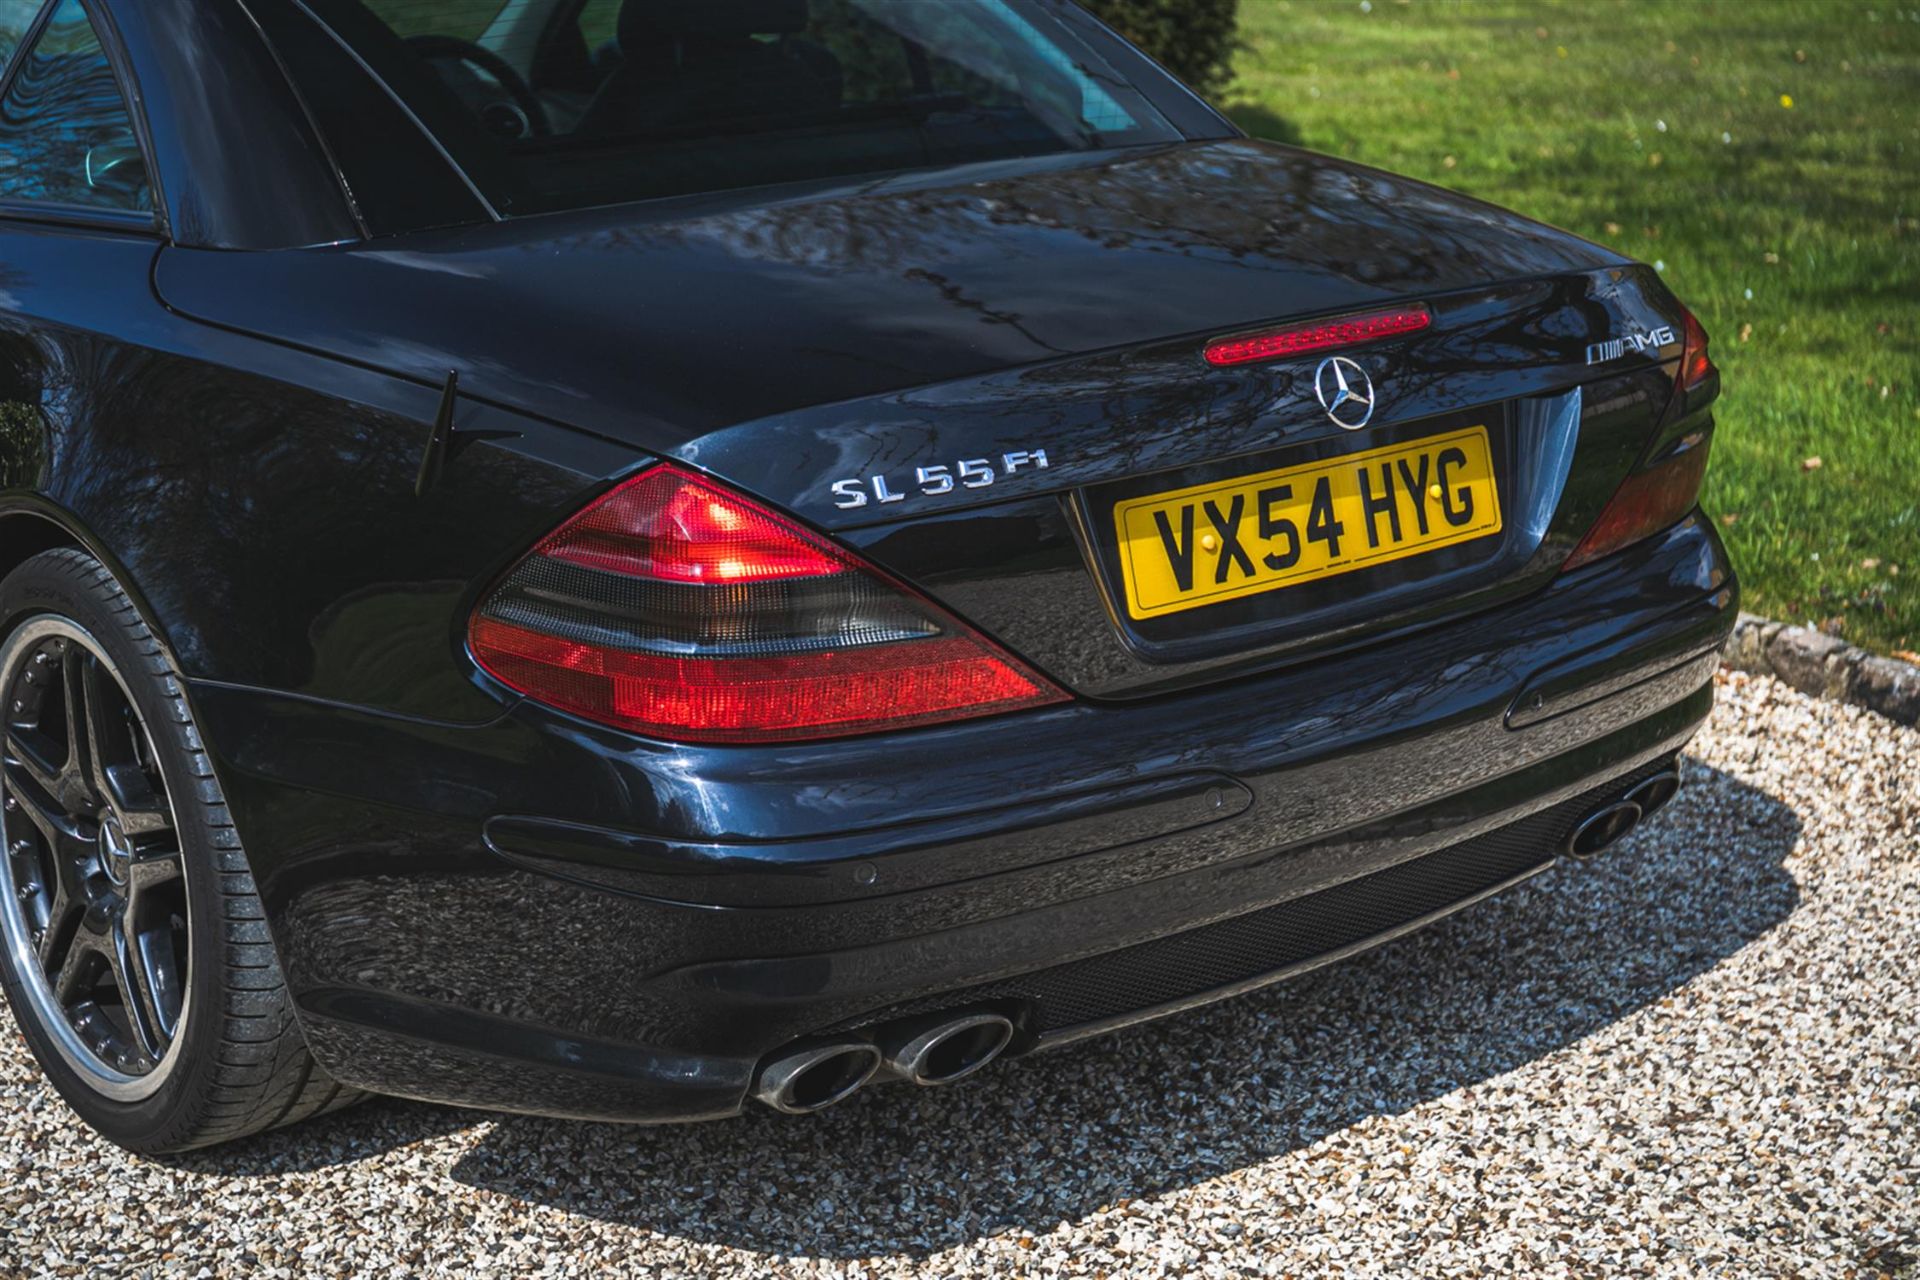 2004 Mercedes-Benz SL55 (R230) 'F1 Performance Pack' - Image 4 of 10